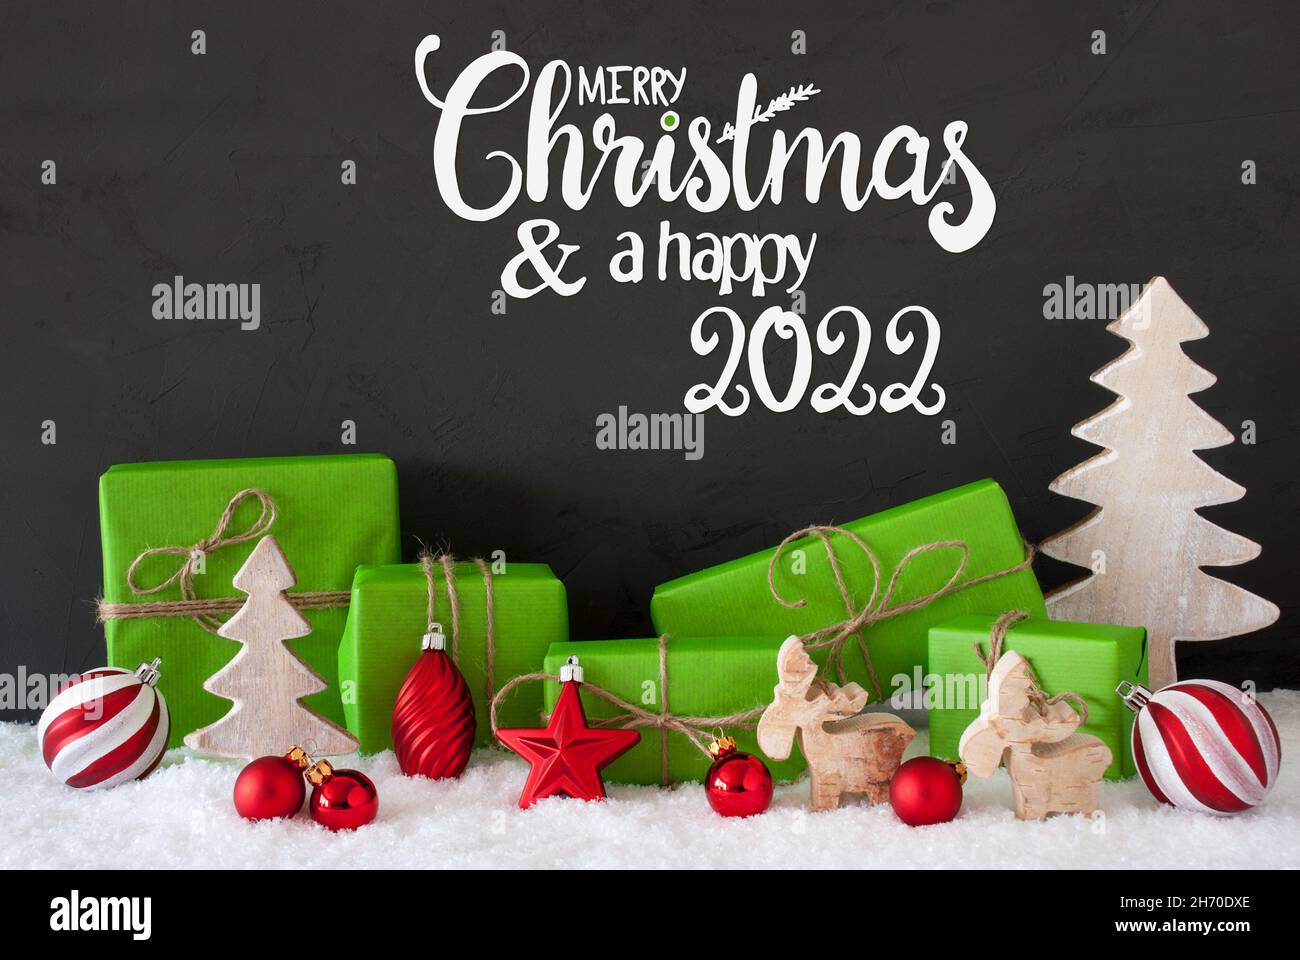 Snow, Tree, Gift, Ball, Merry Christmas And A Happy 2022 Stock Photo